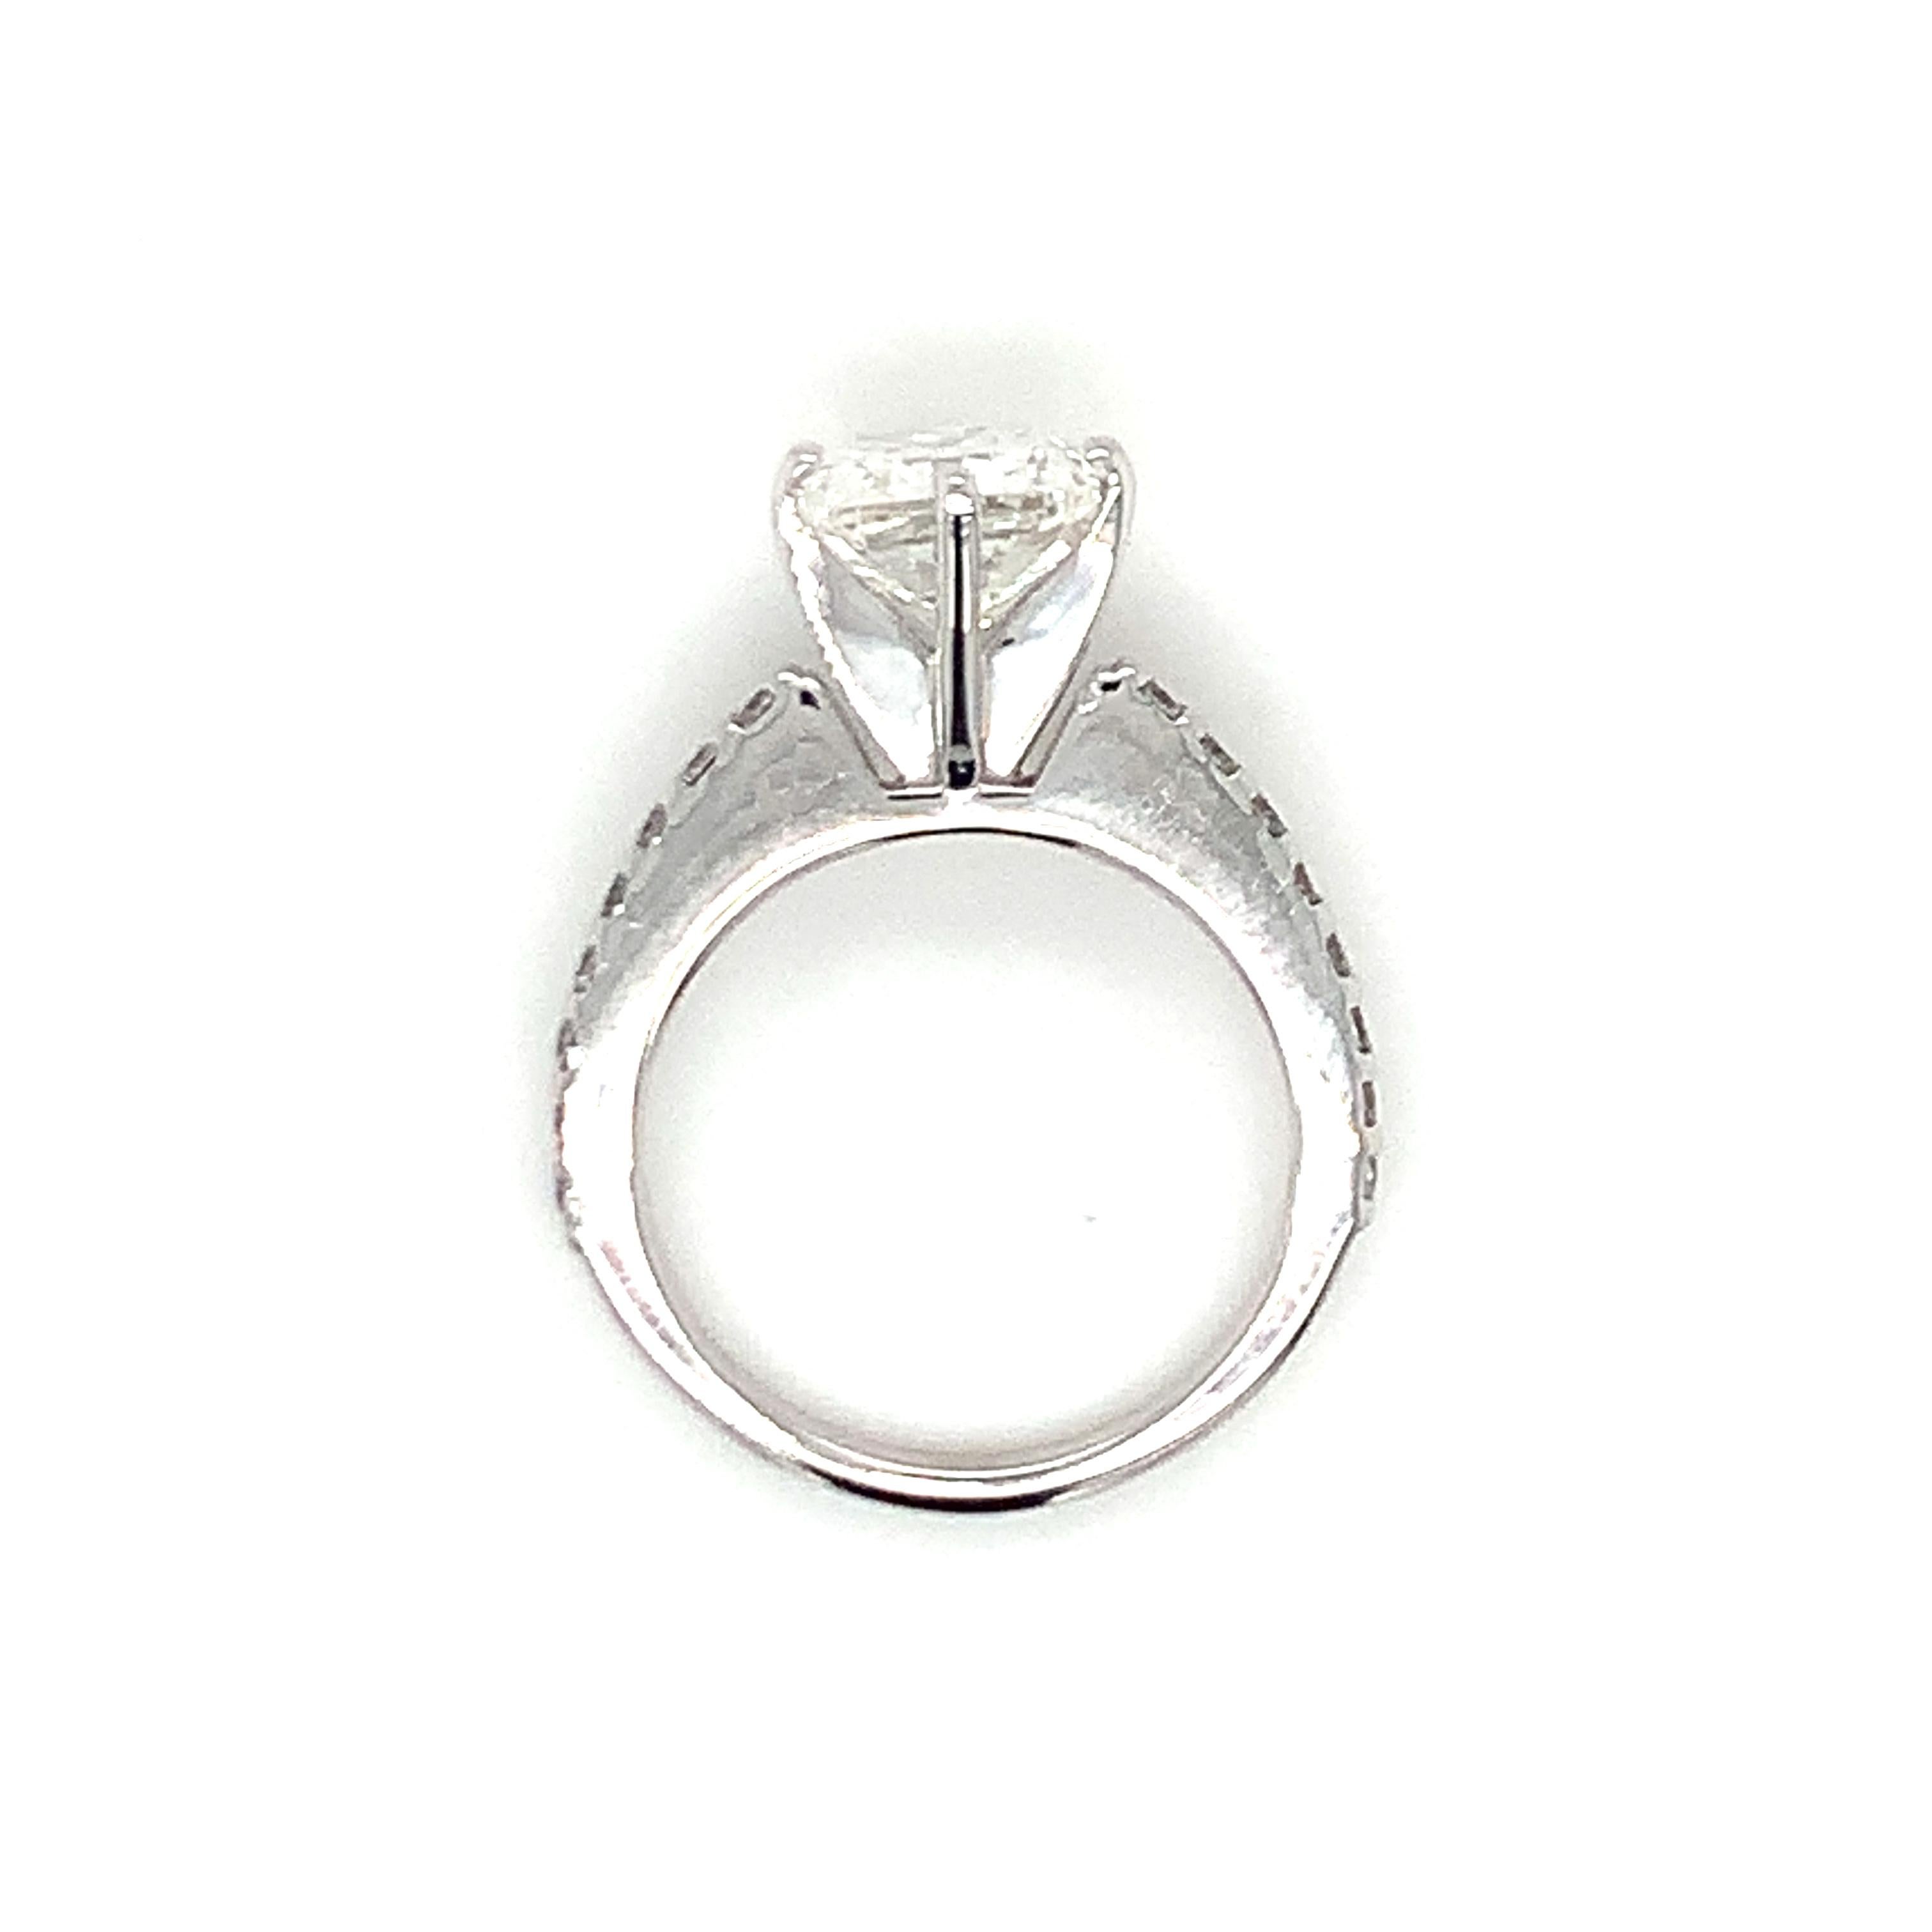 Contemporary GIA Certified 2.01 Carat White Gold Diamond Engagement Ring For Sale